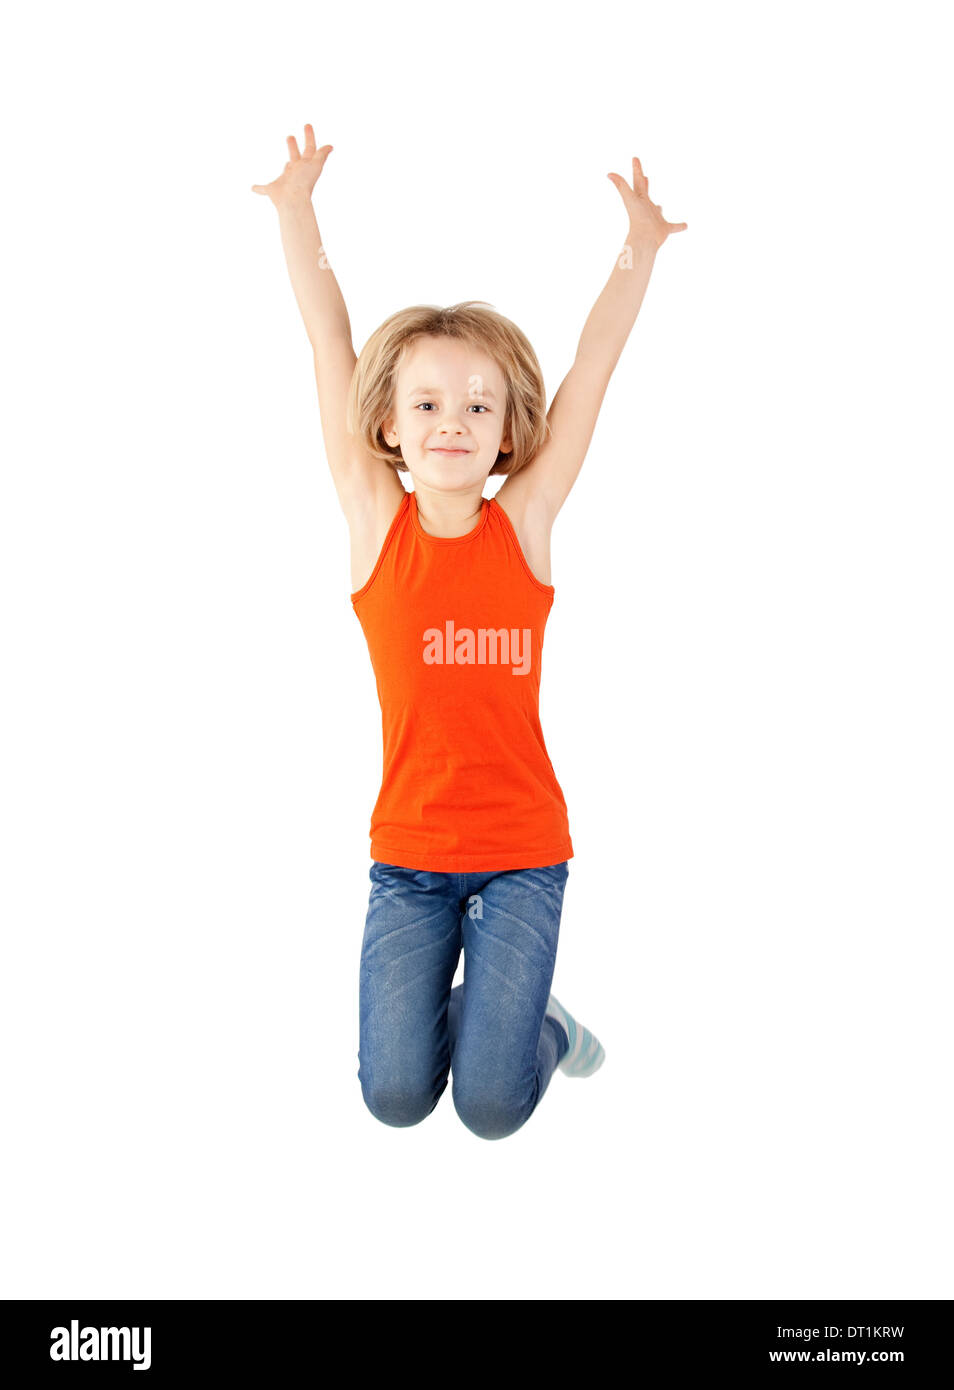 young girl jumping Stock Photo